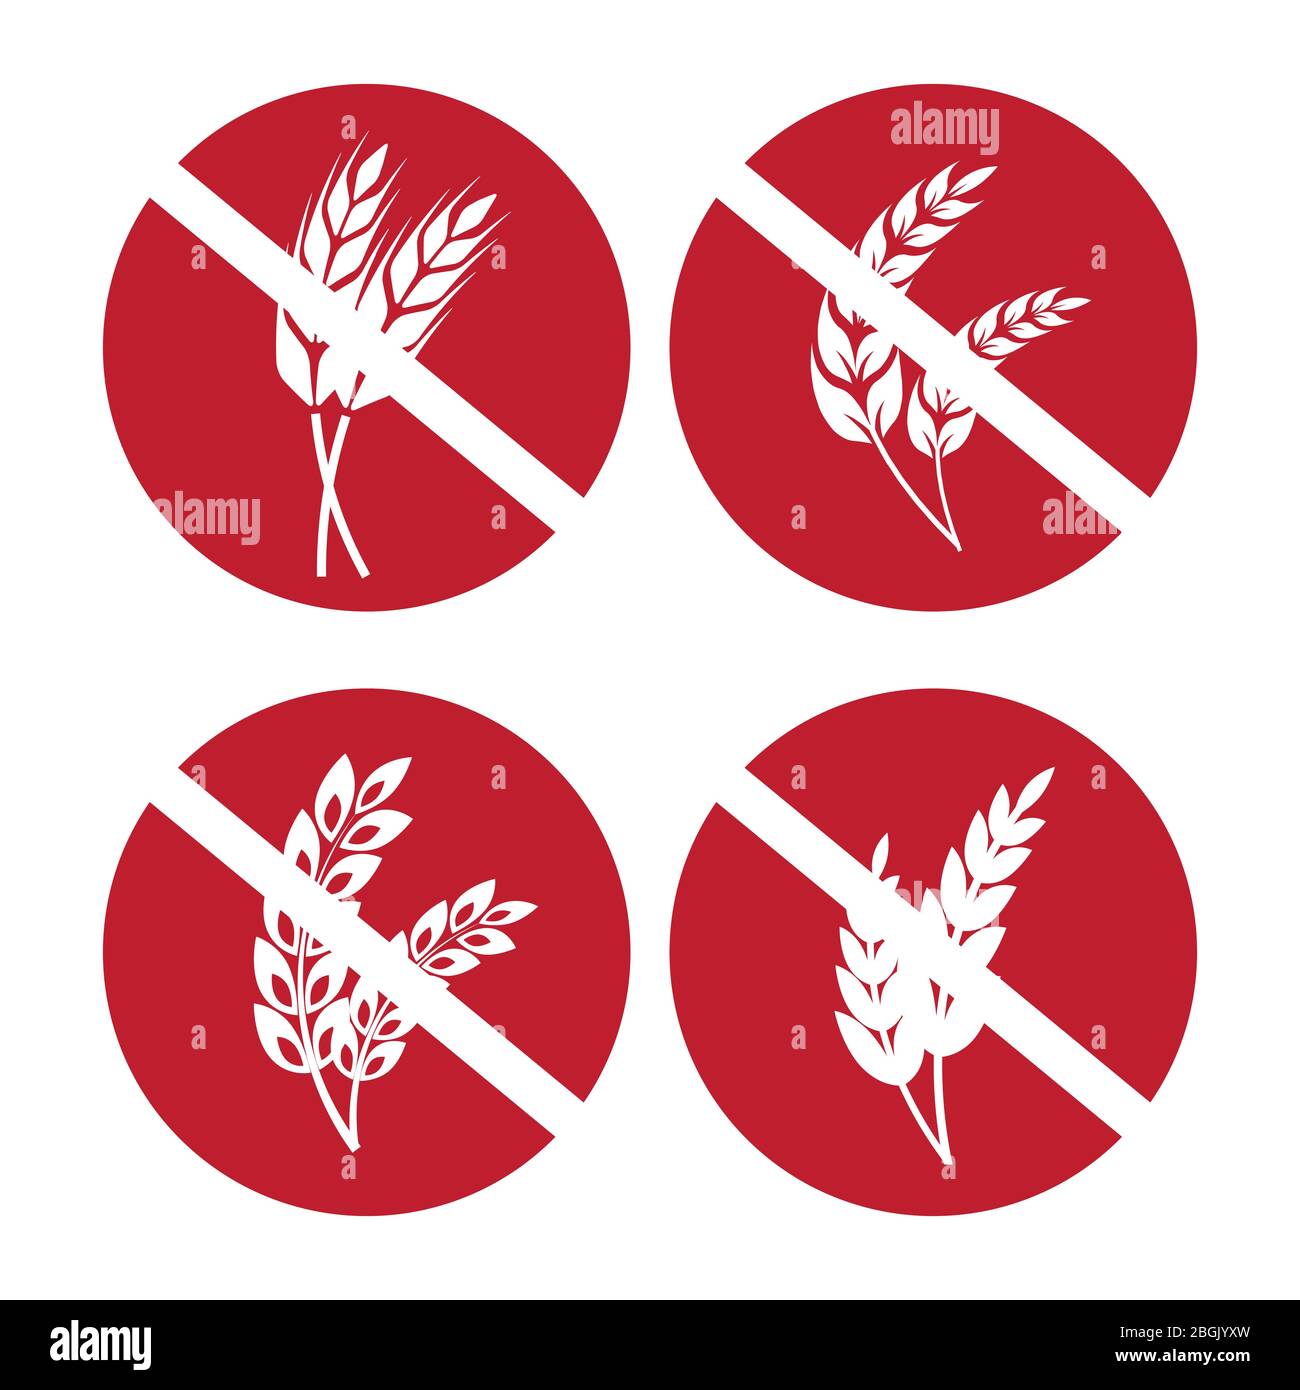 Gluten free icons set with wheat and rye ears. Vector illustration Stock Vector